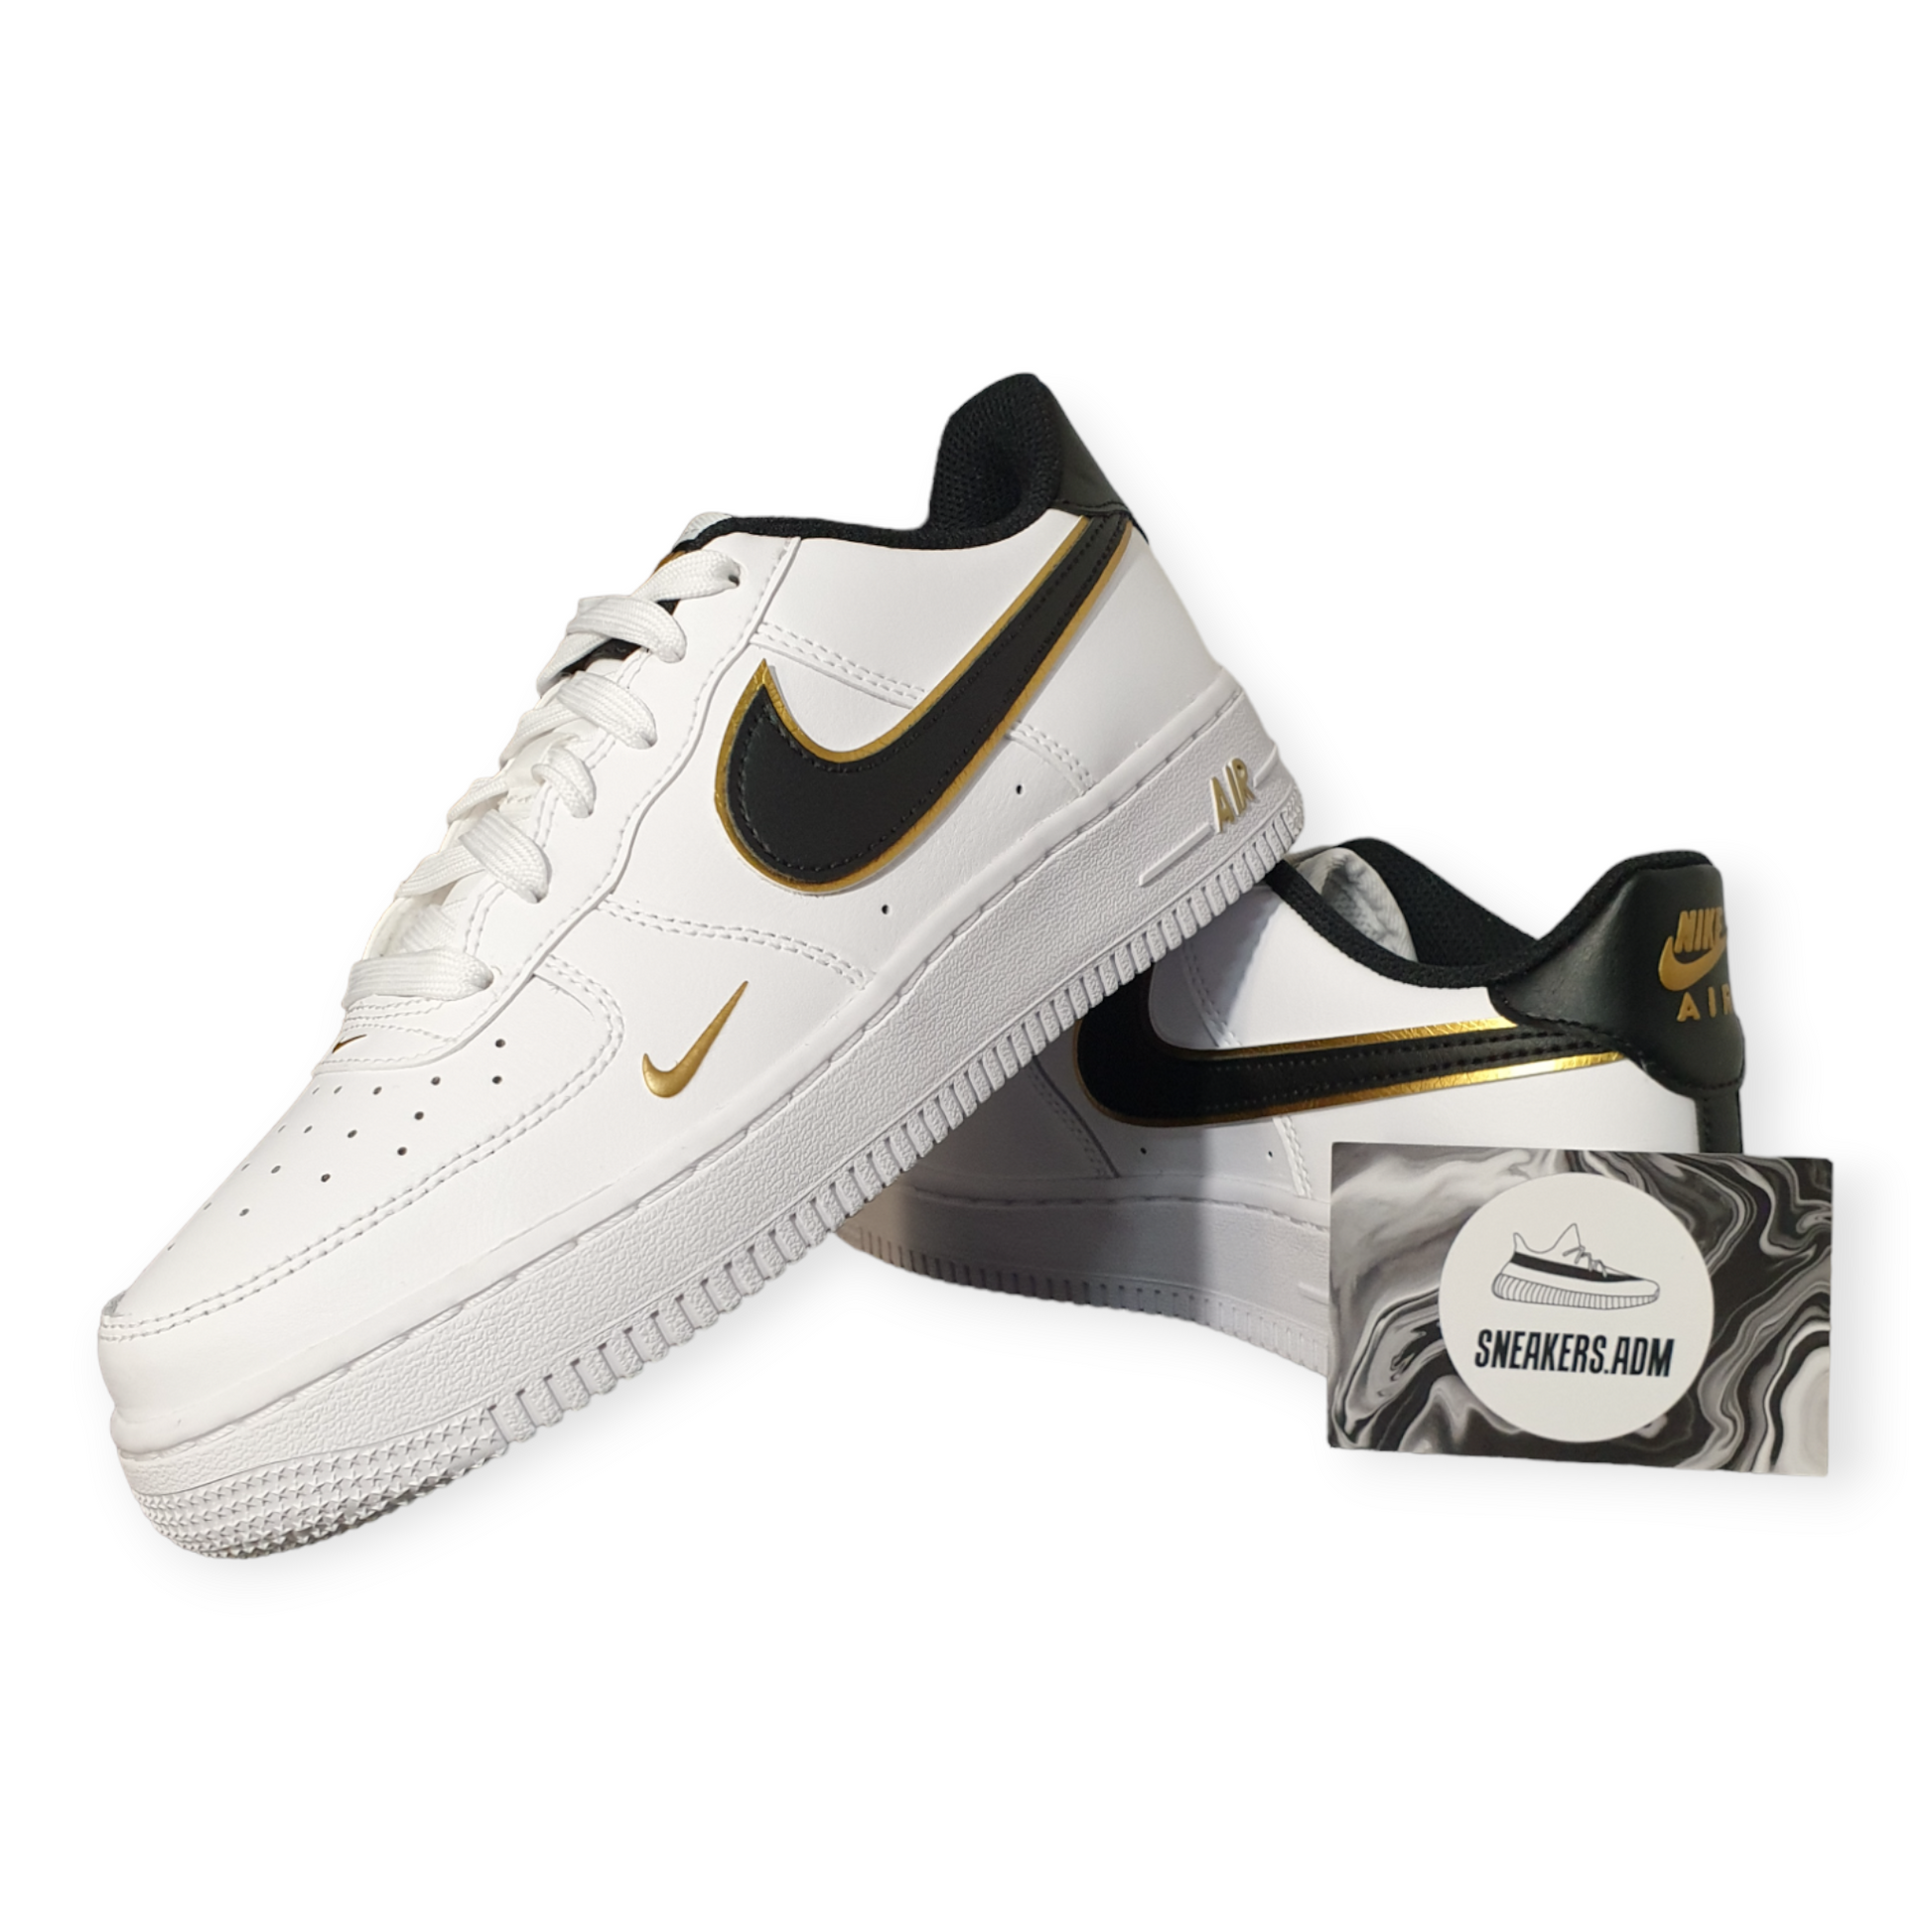 Nike Air Force 1 Low '07 LV8 Double Swoosh White Metallic Gold (GS